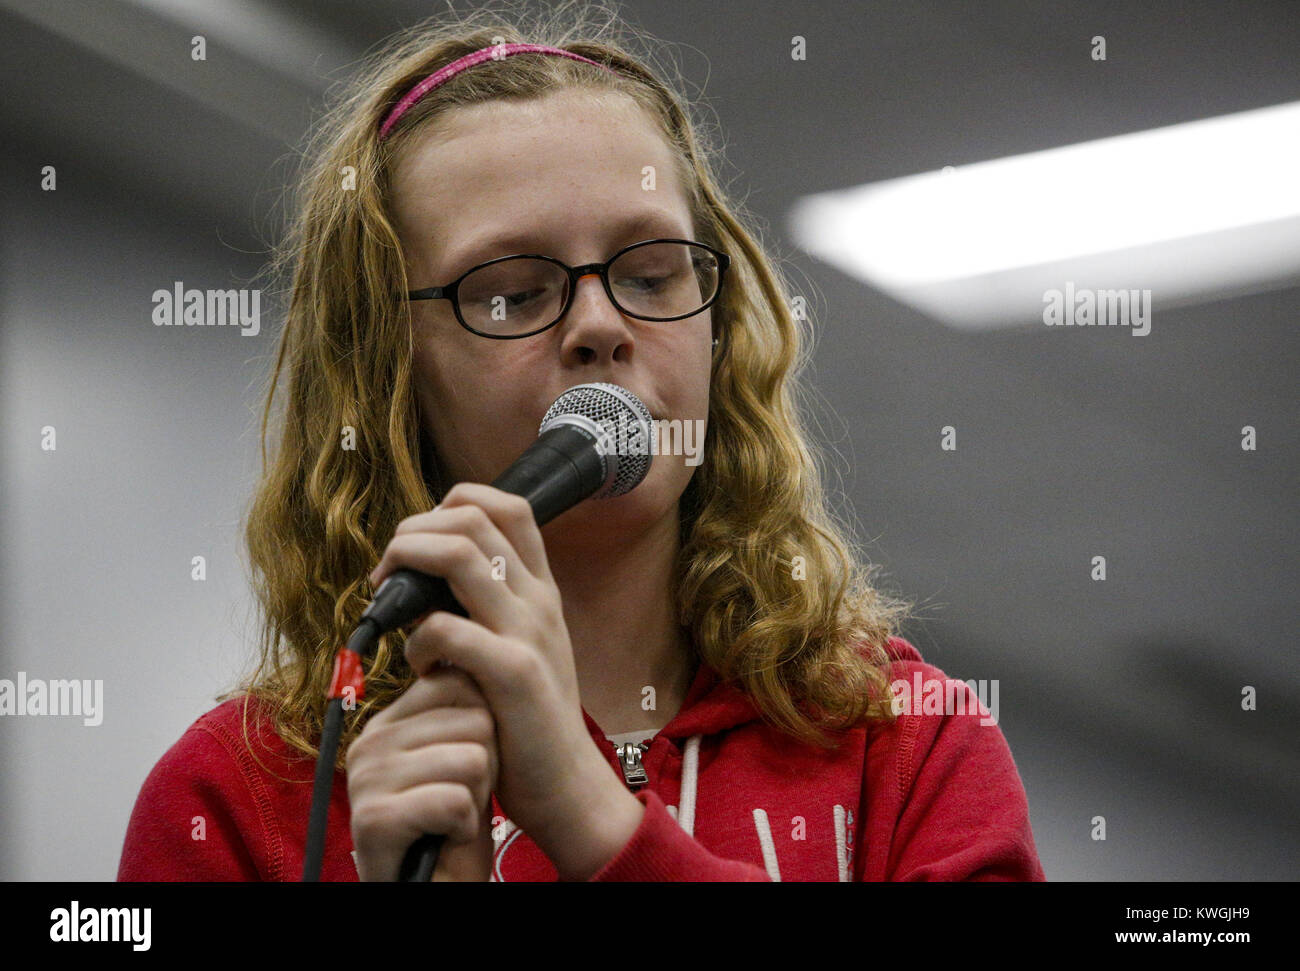 Davenport, Iowa, USA. 27th Dec, 2016. Vocalist Alexa Mueller, 11, of East Moline digs deep singing a blues verse with her band at the River Music Experience building in Davenport on Tuesday, December 27, 2016. The annual Winter Blues program features vocal and instrumental workshops as well as a concentration on blues composition and improvisation. Sessions are open to area musicians aged 8-18 and run Monday through Thursday before concluding in a blues jam in the Redstone Room on Friday. Credit: Andy Abeyta/Quad-City Times/ZUMA Wire/Alamy Live News Stock Photo